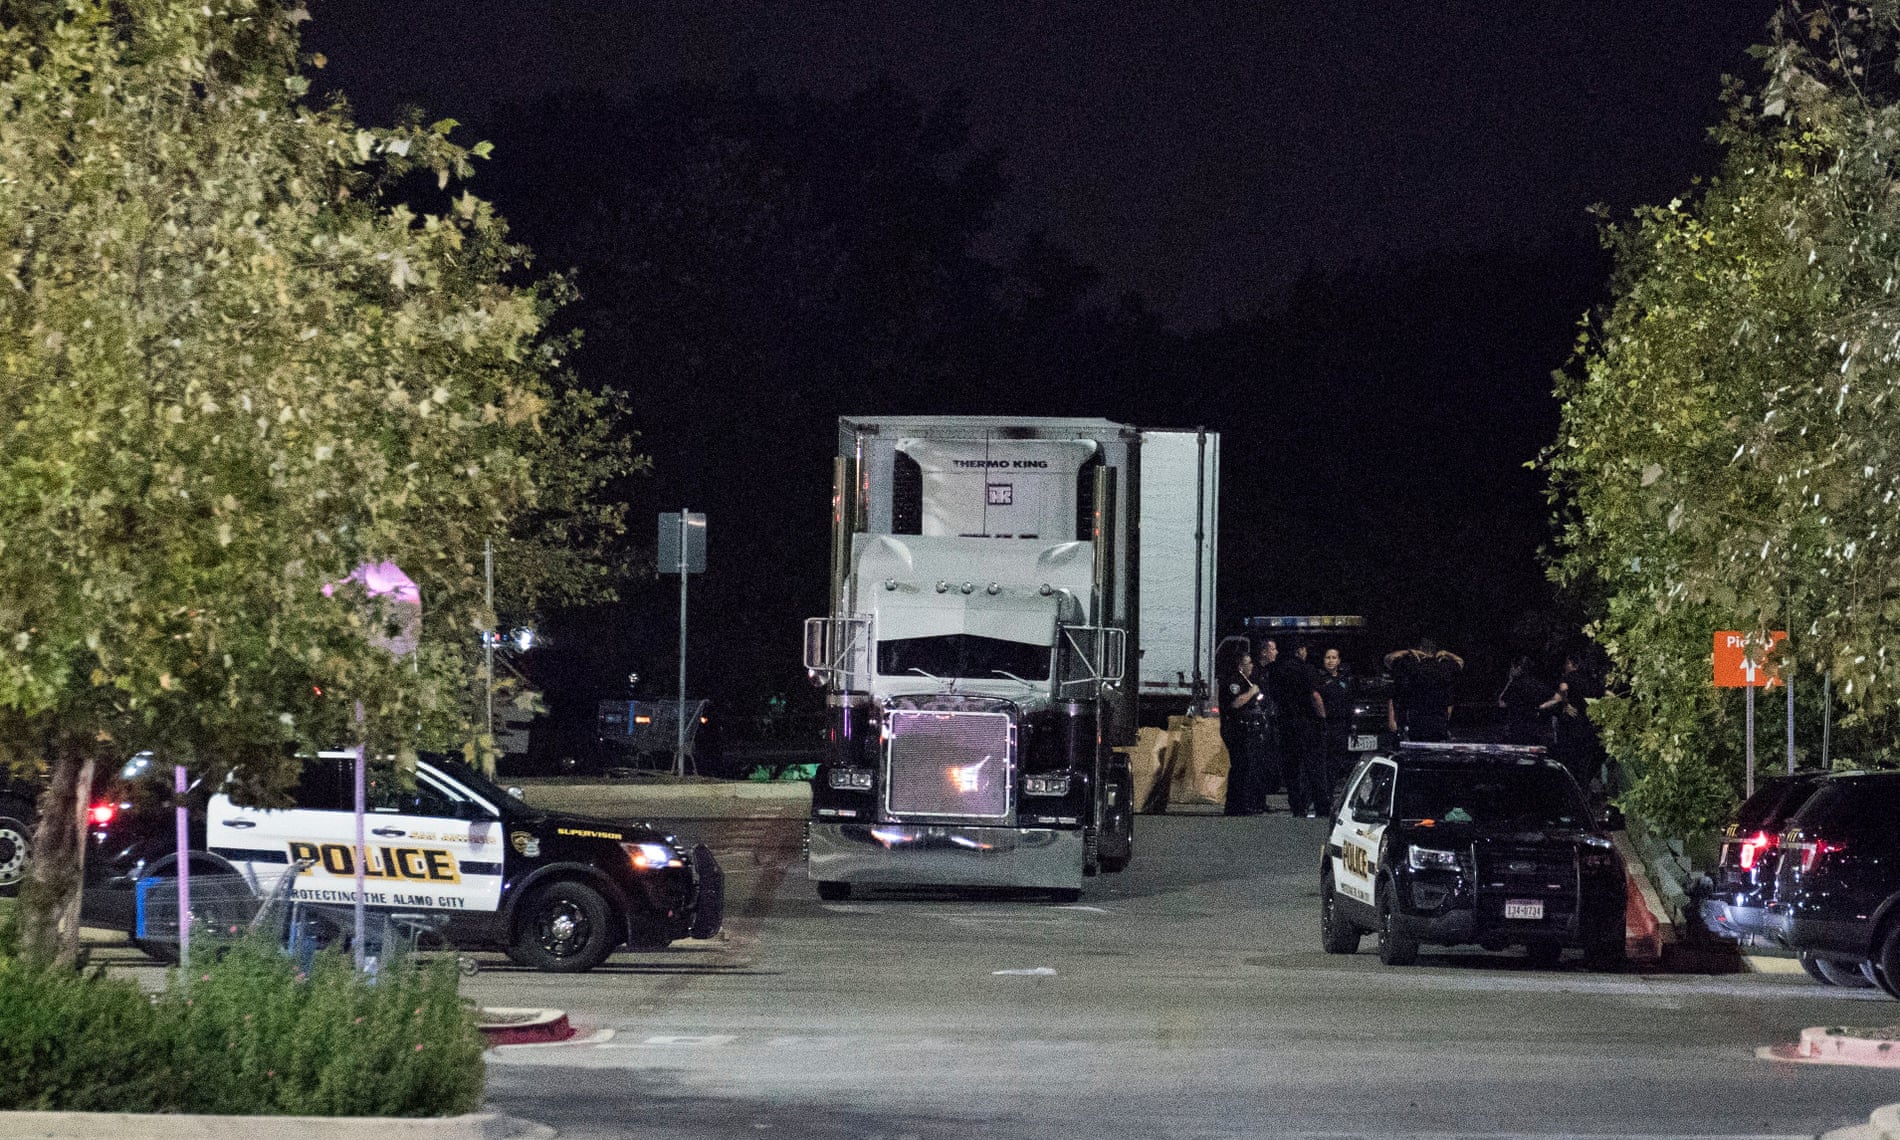 The truck was found in a Walmart parking lot in San Antonio. As many as a hundred people from Mexico and Central America had been crammed inside.